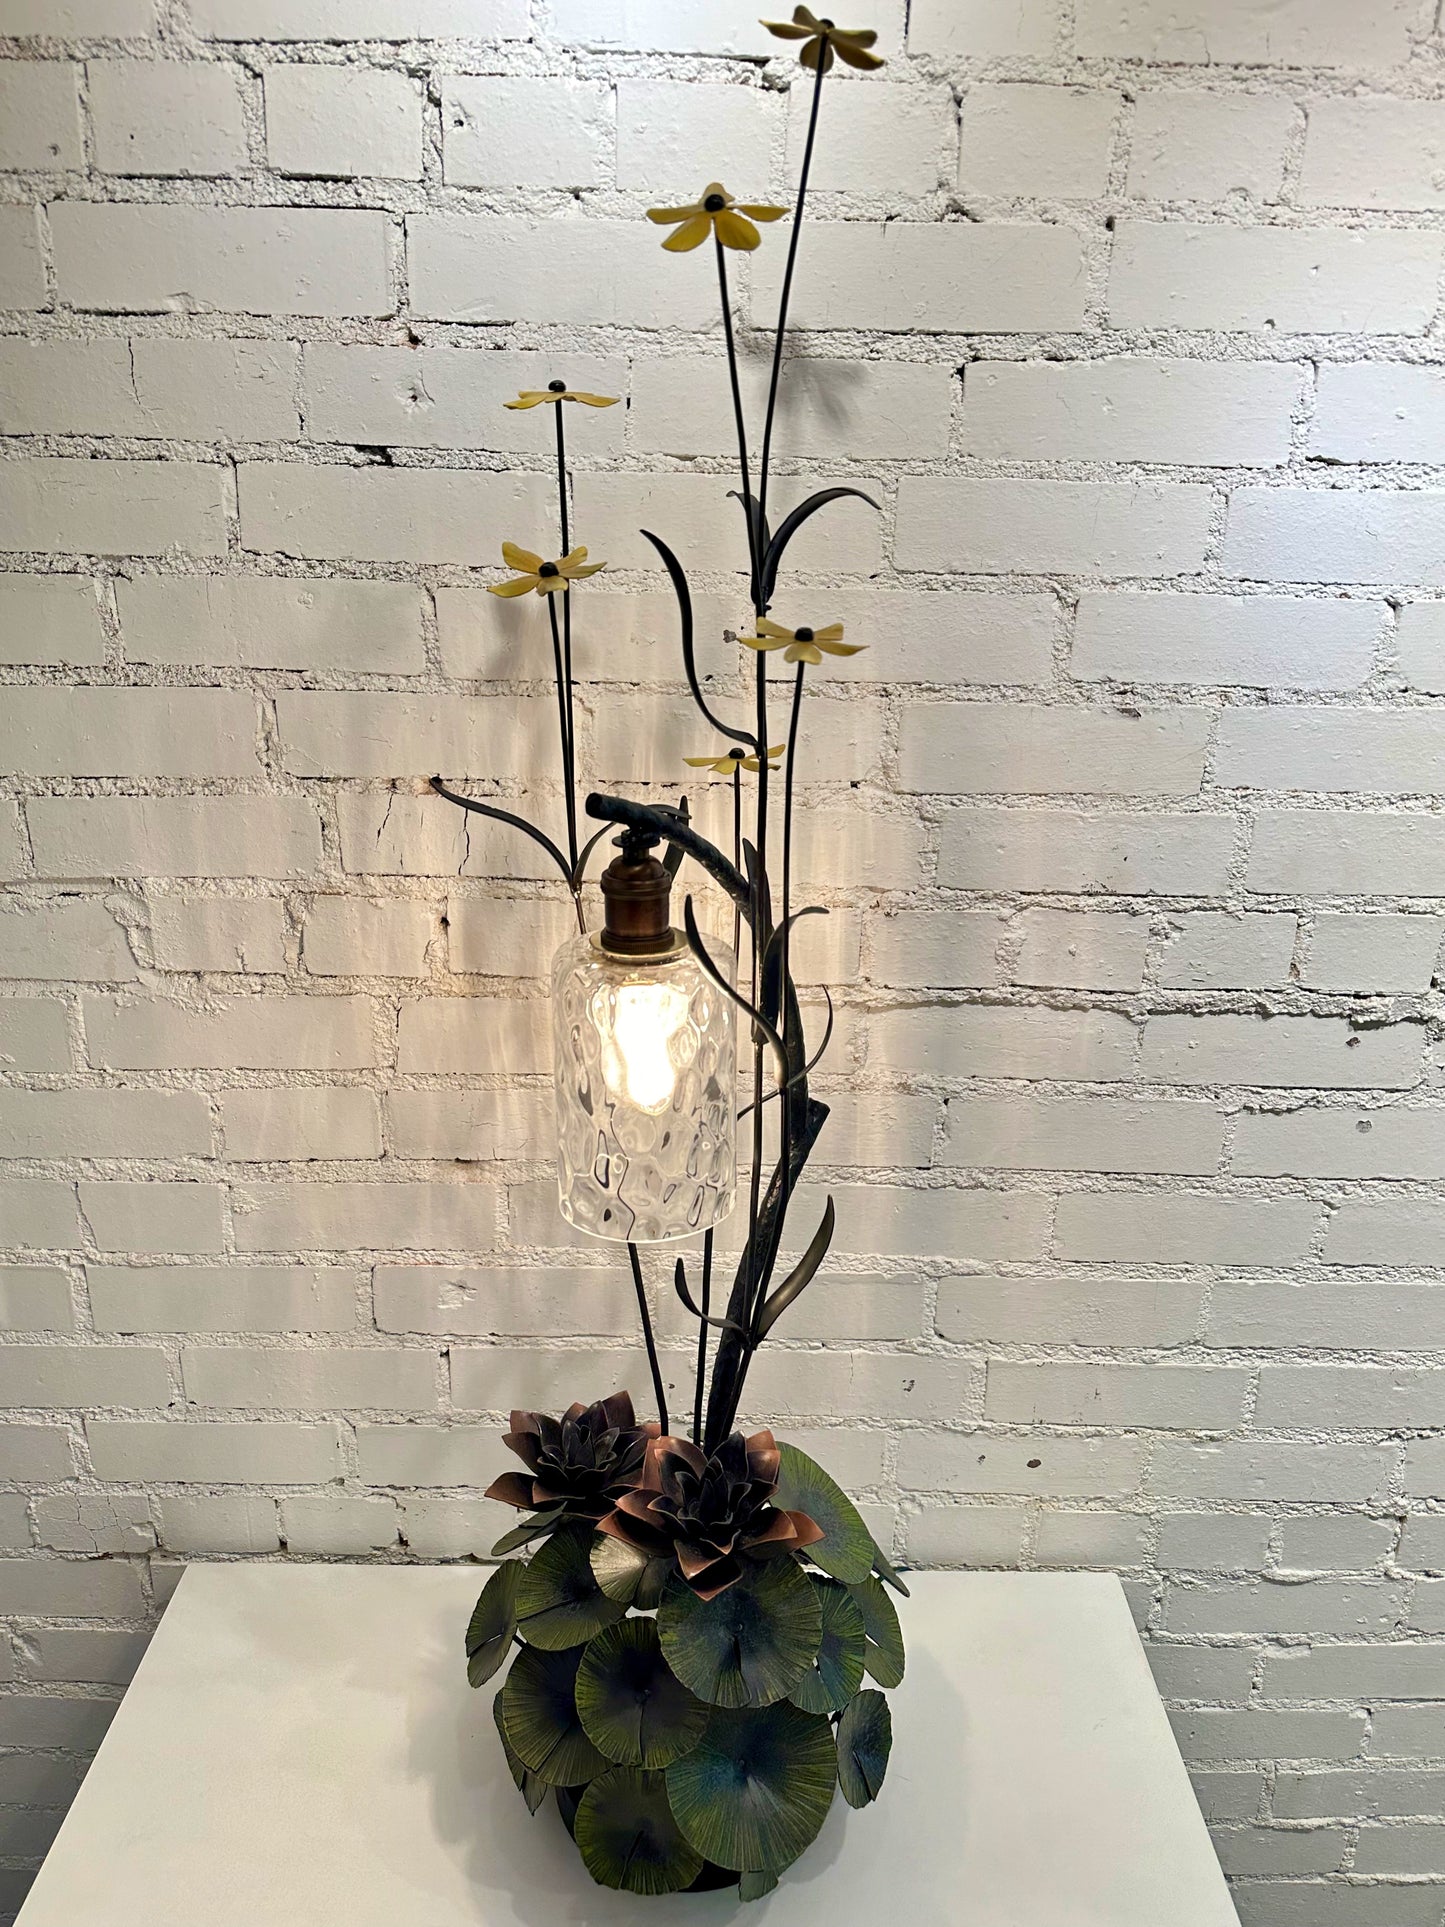 LOTUS WITH YELLOW FLOWER FIELD STUDY TABLE LAMP WITH BLACK SHADE